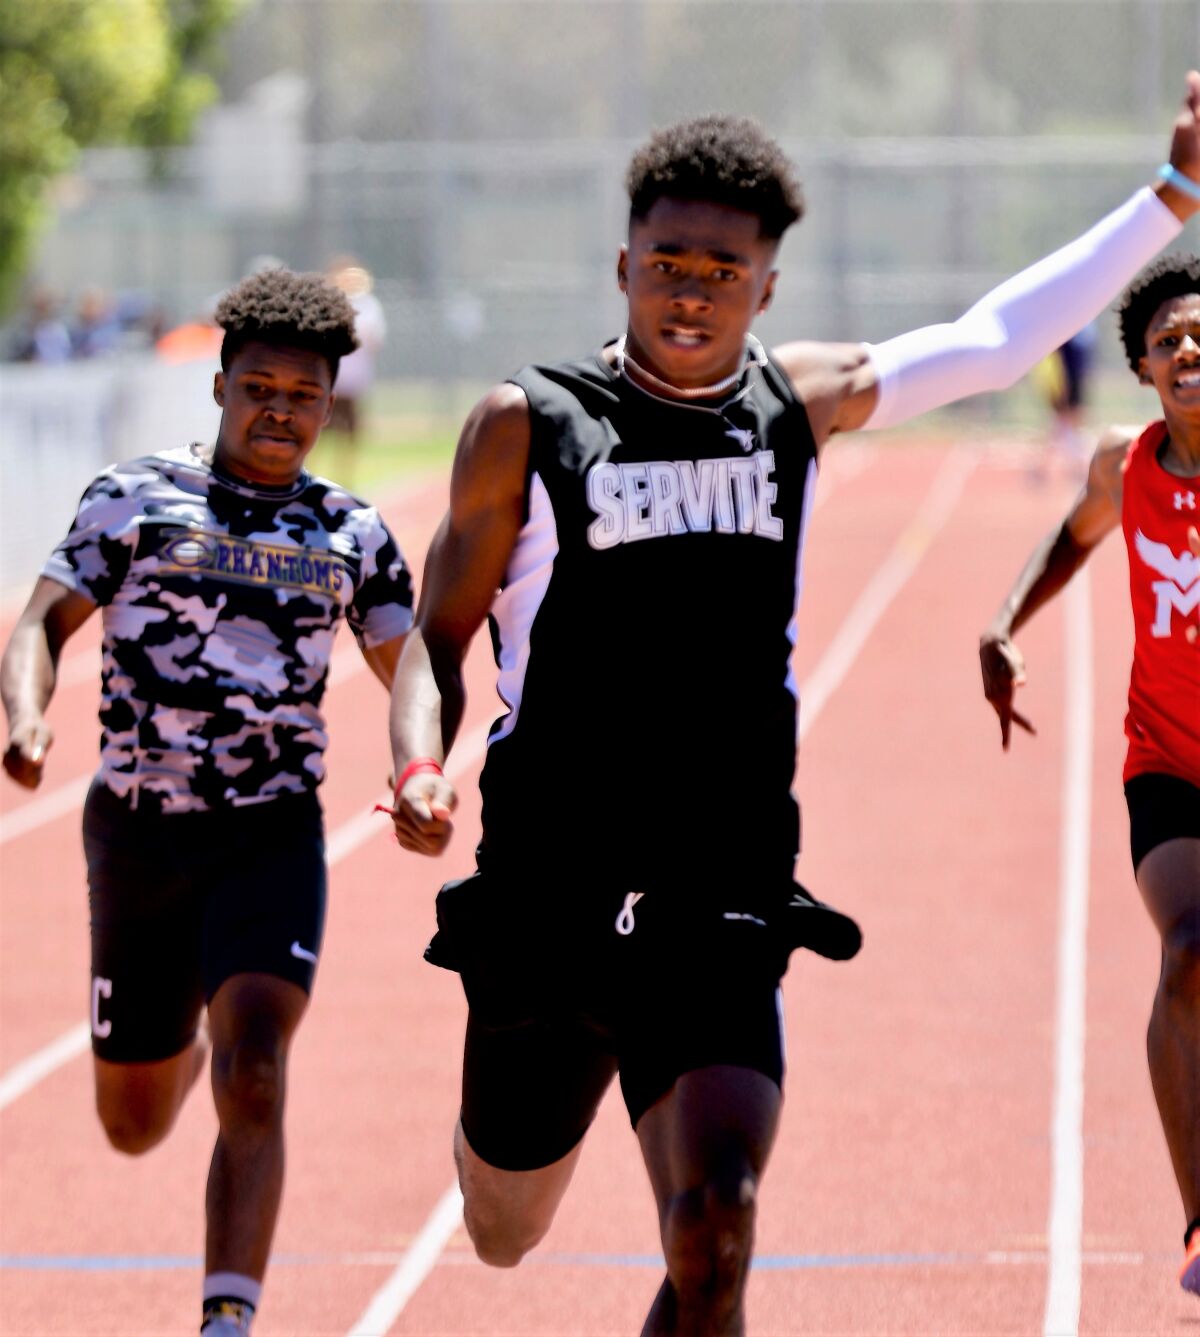 Max Thomas raises his arm after winning the 200 in 21.44 at the Southern Section Division 3 track finals on June 13, 2021.